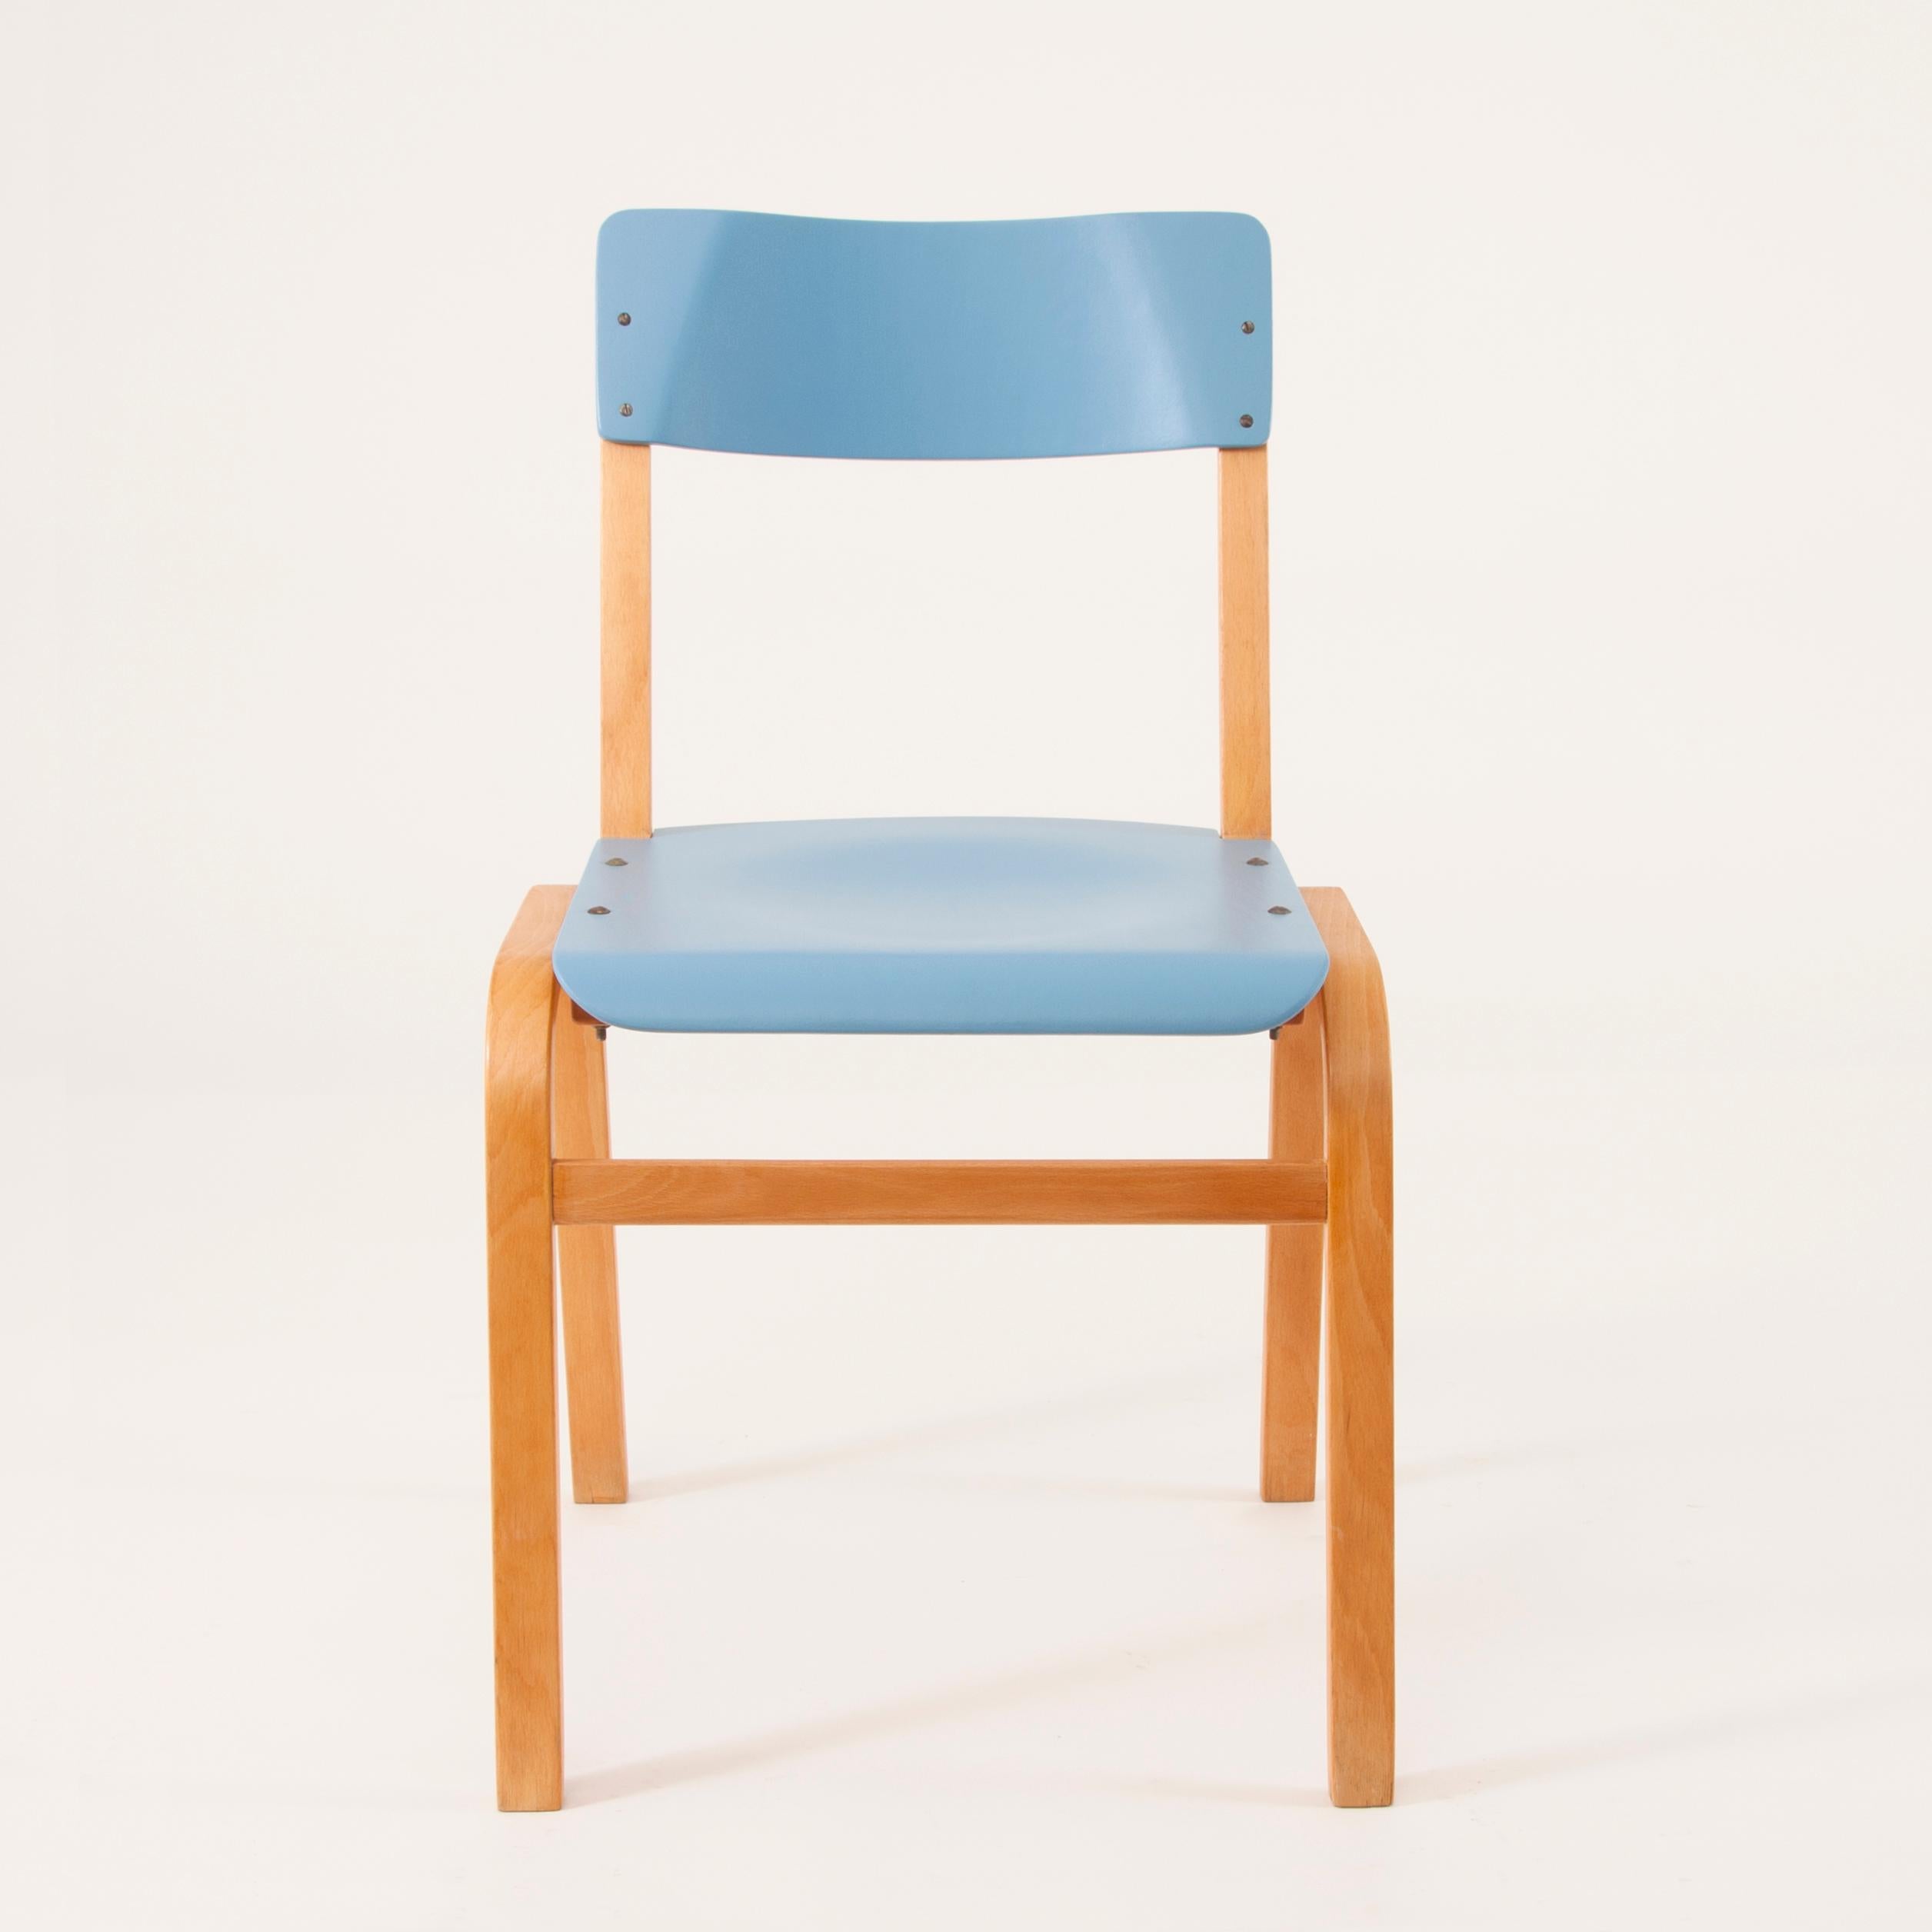 Up to 24 Colorful Midcentury Bentwood Chairs by Ton, Czechoslovakia, 1960s 9